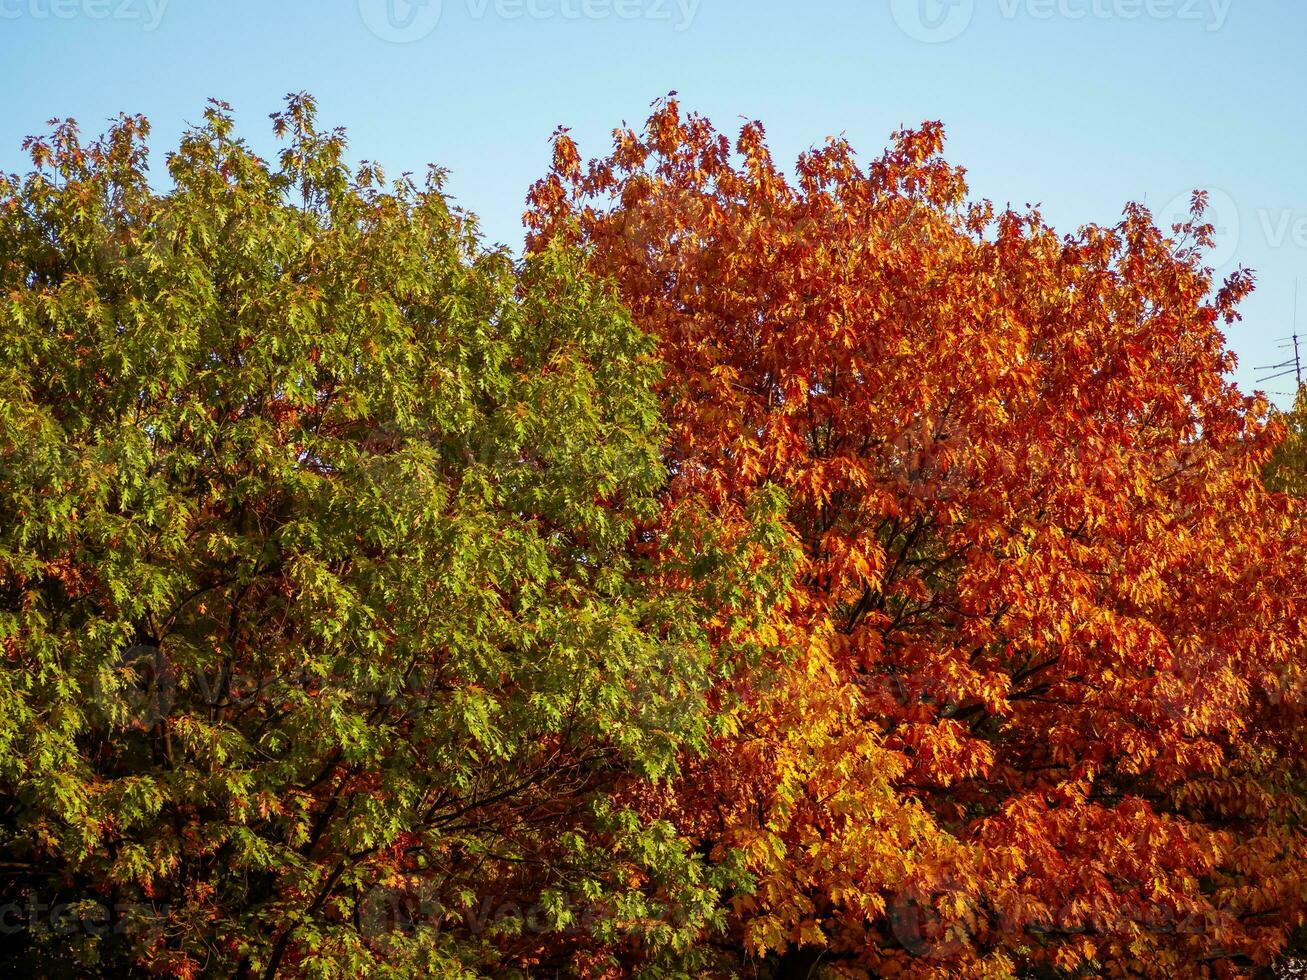 Contrast of color of oak tree leaves in autumn photo